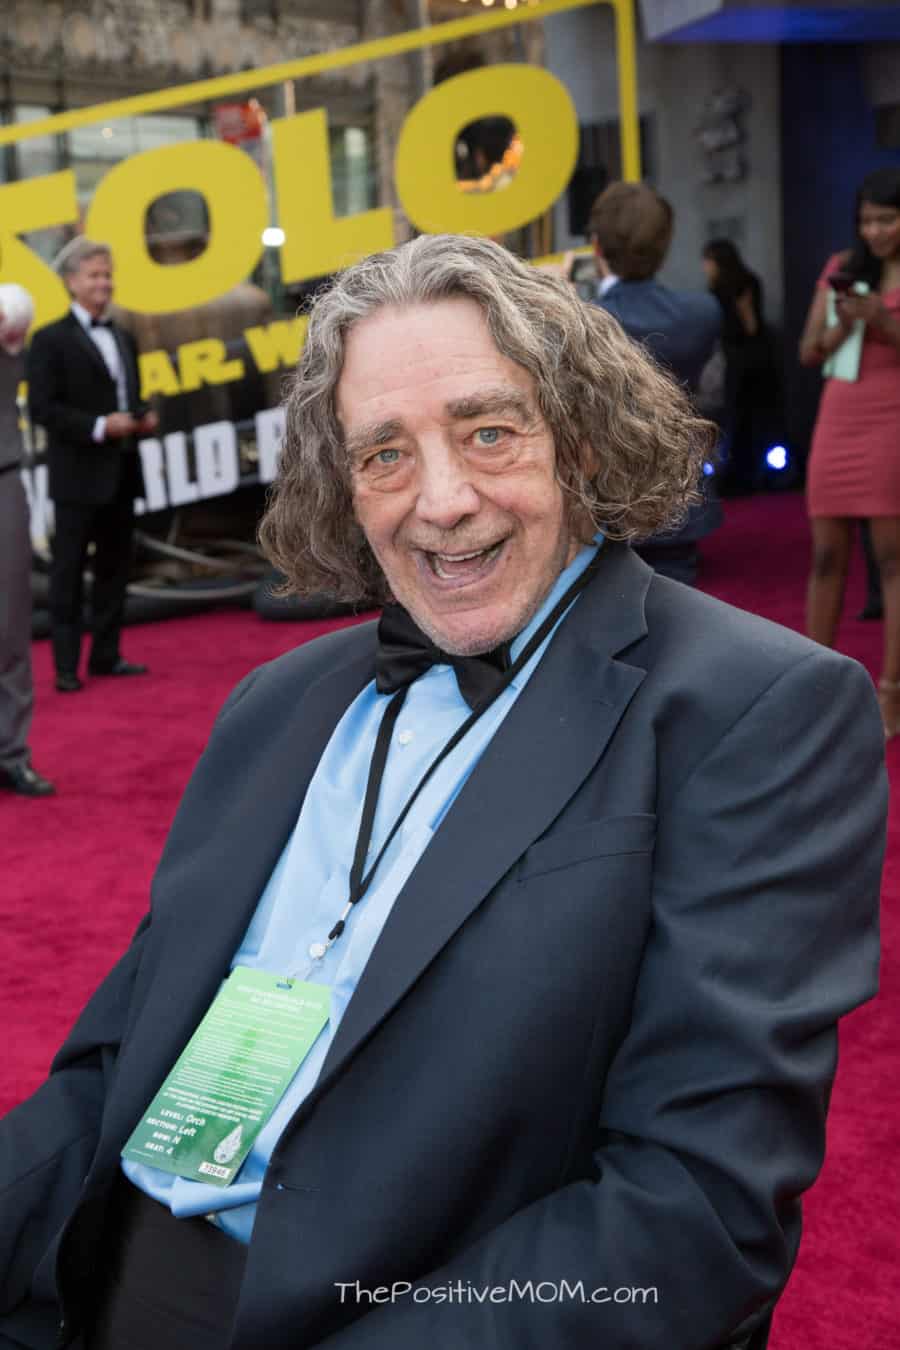 Peter Mayhew attends the world premiere of “Solo: A Star Wars Story” in Hollywood on May 10, 2018..(Photo: Alex J. Berliner/ABImages).